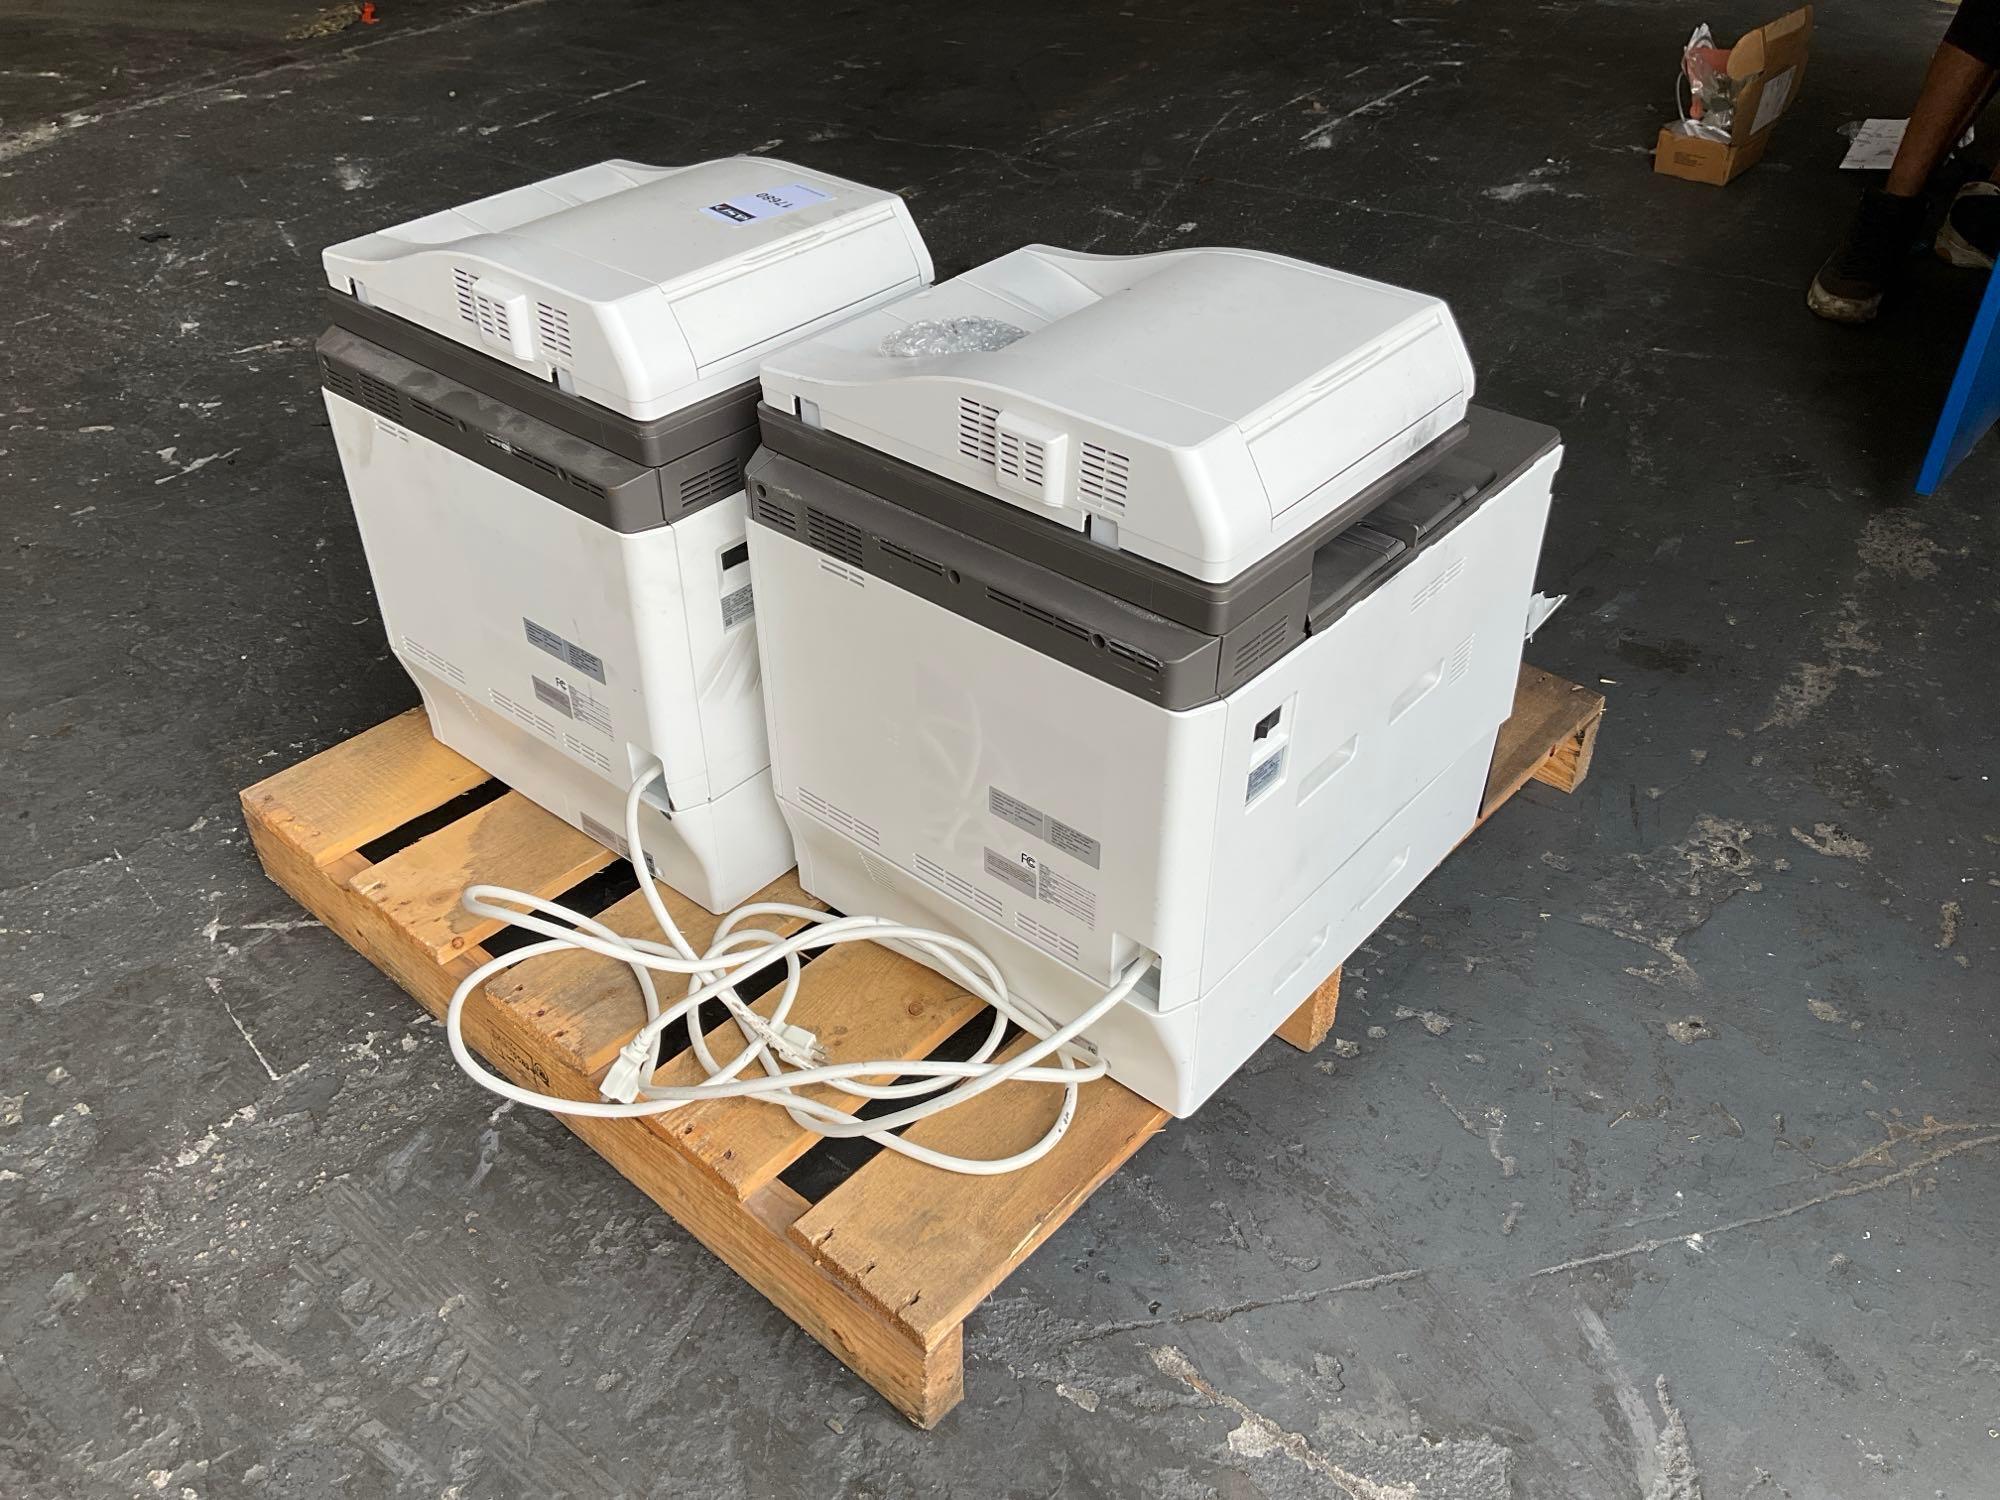 TWO PRINTERS/COPIERS